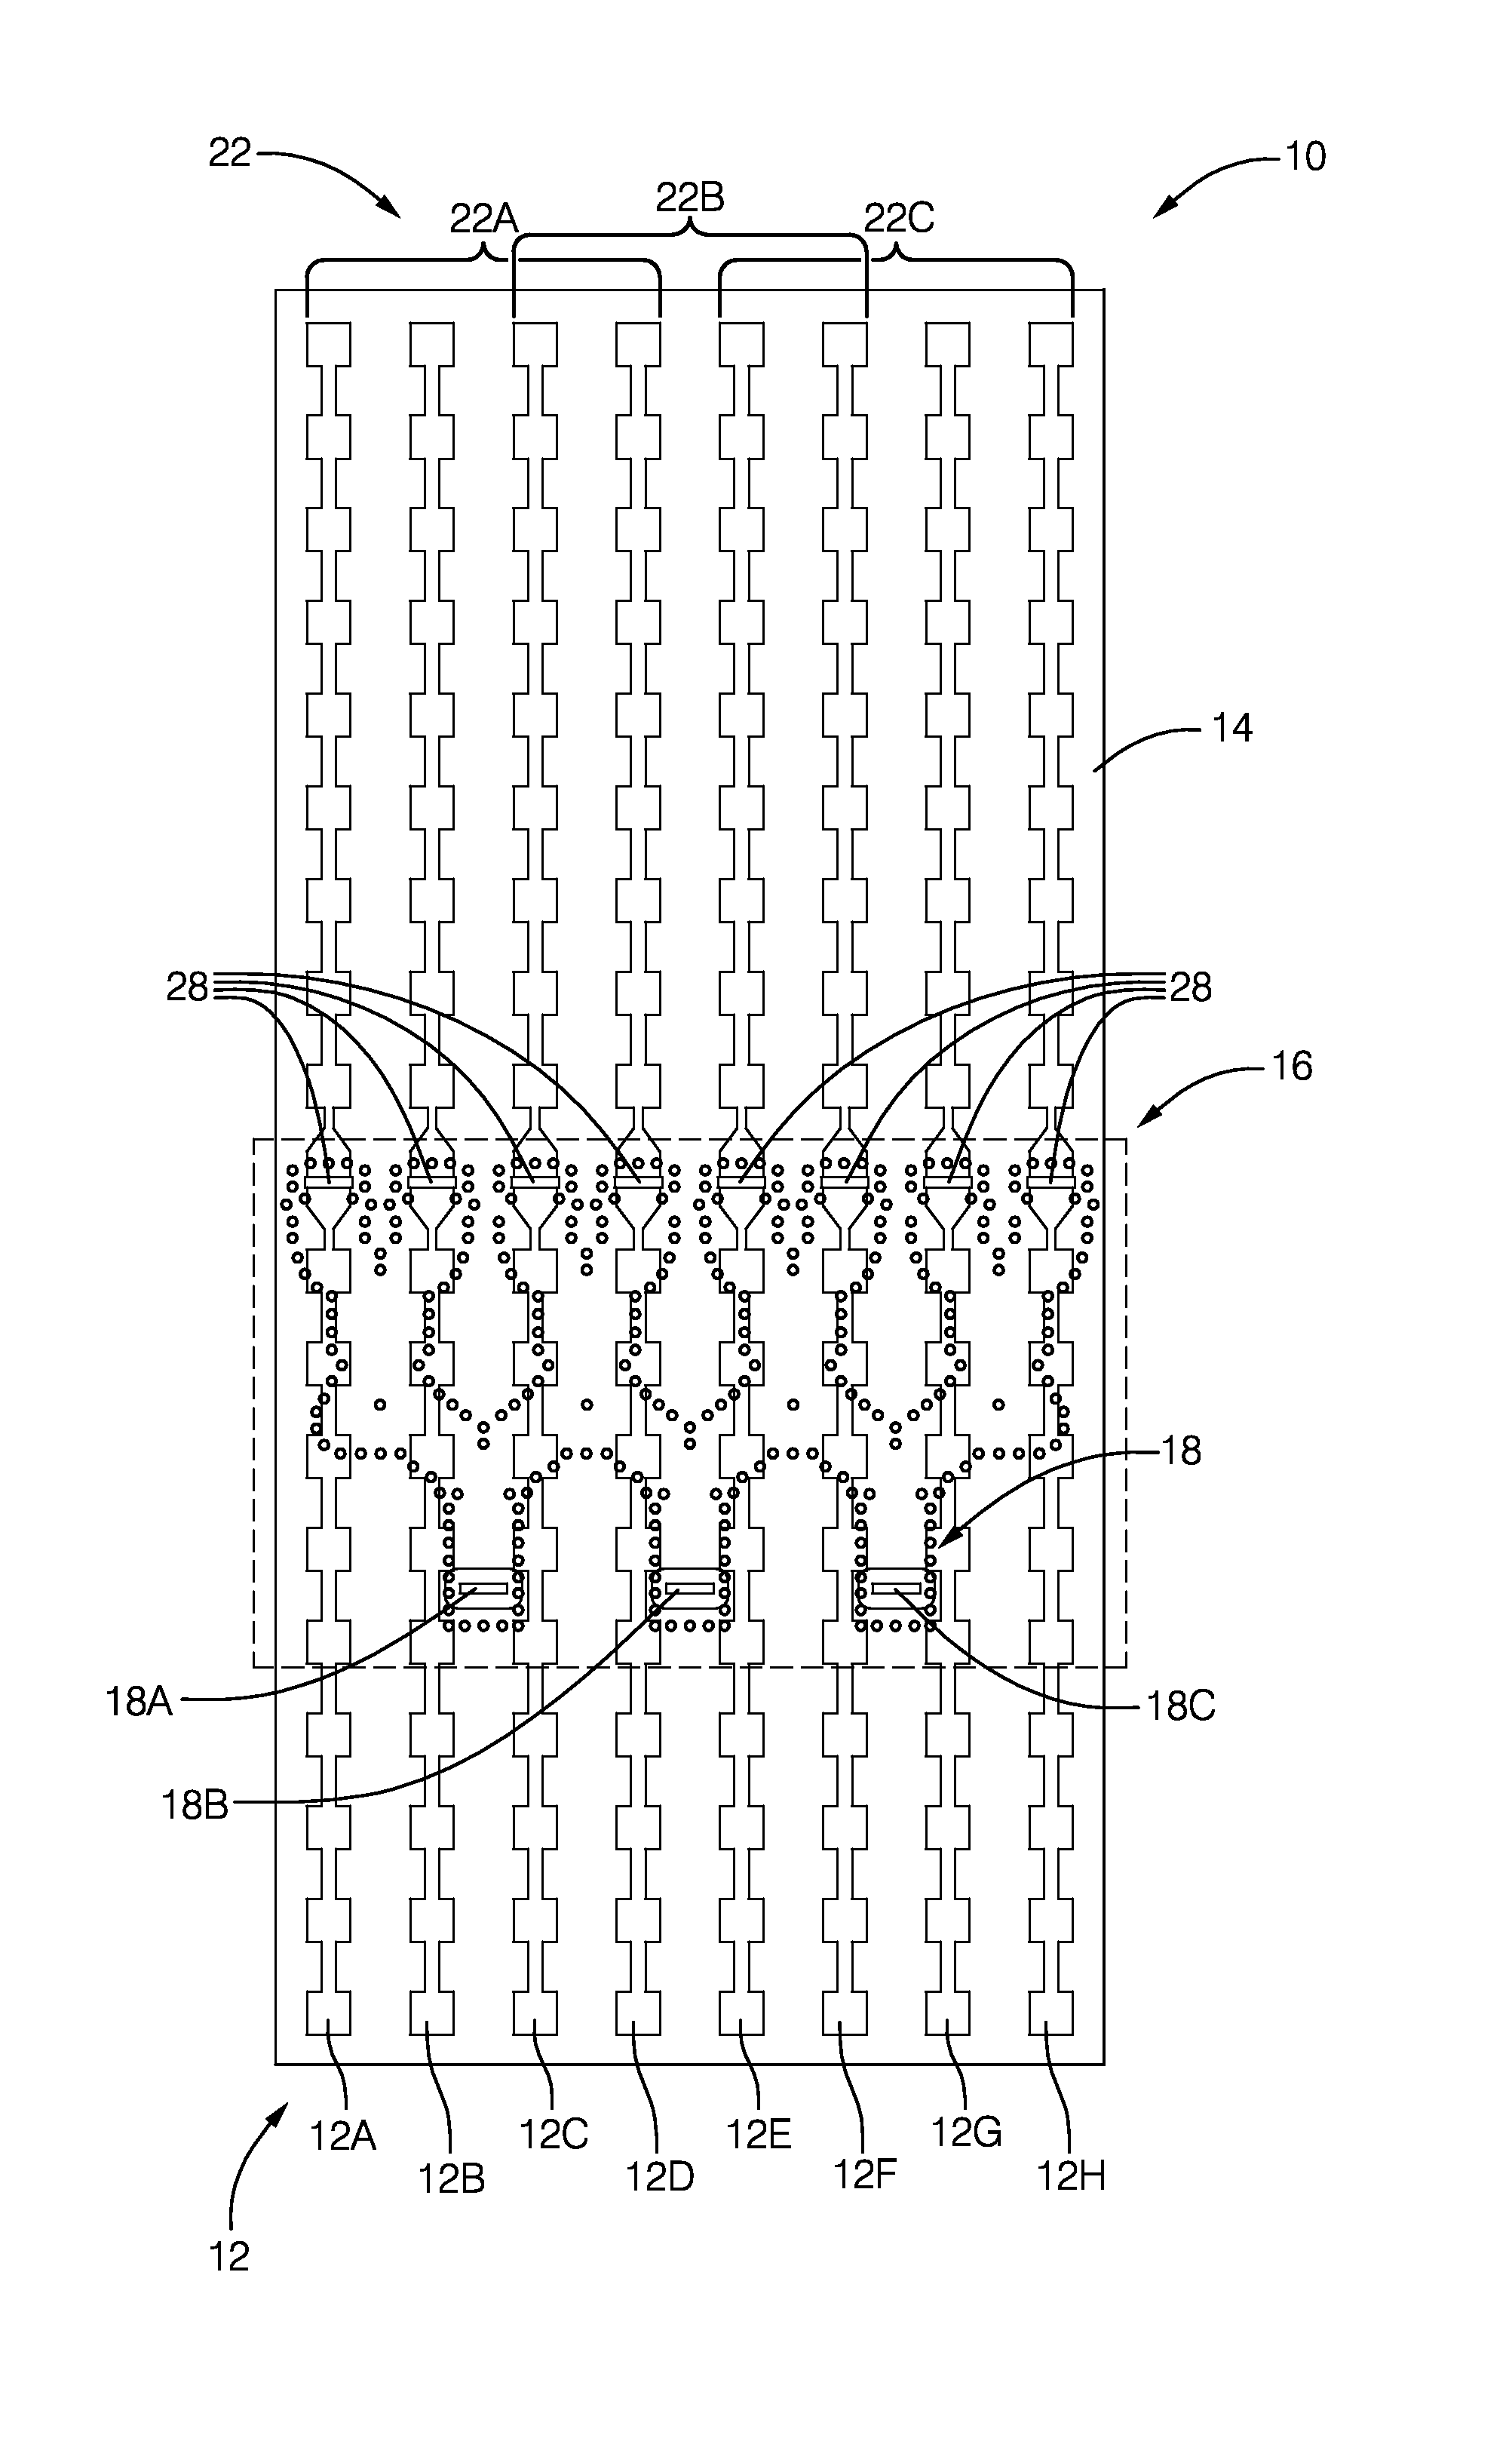 Antenna with fifty percent overlapped subarrays